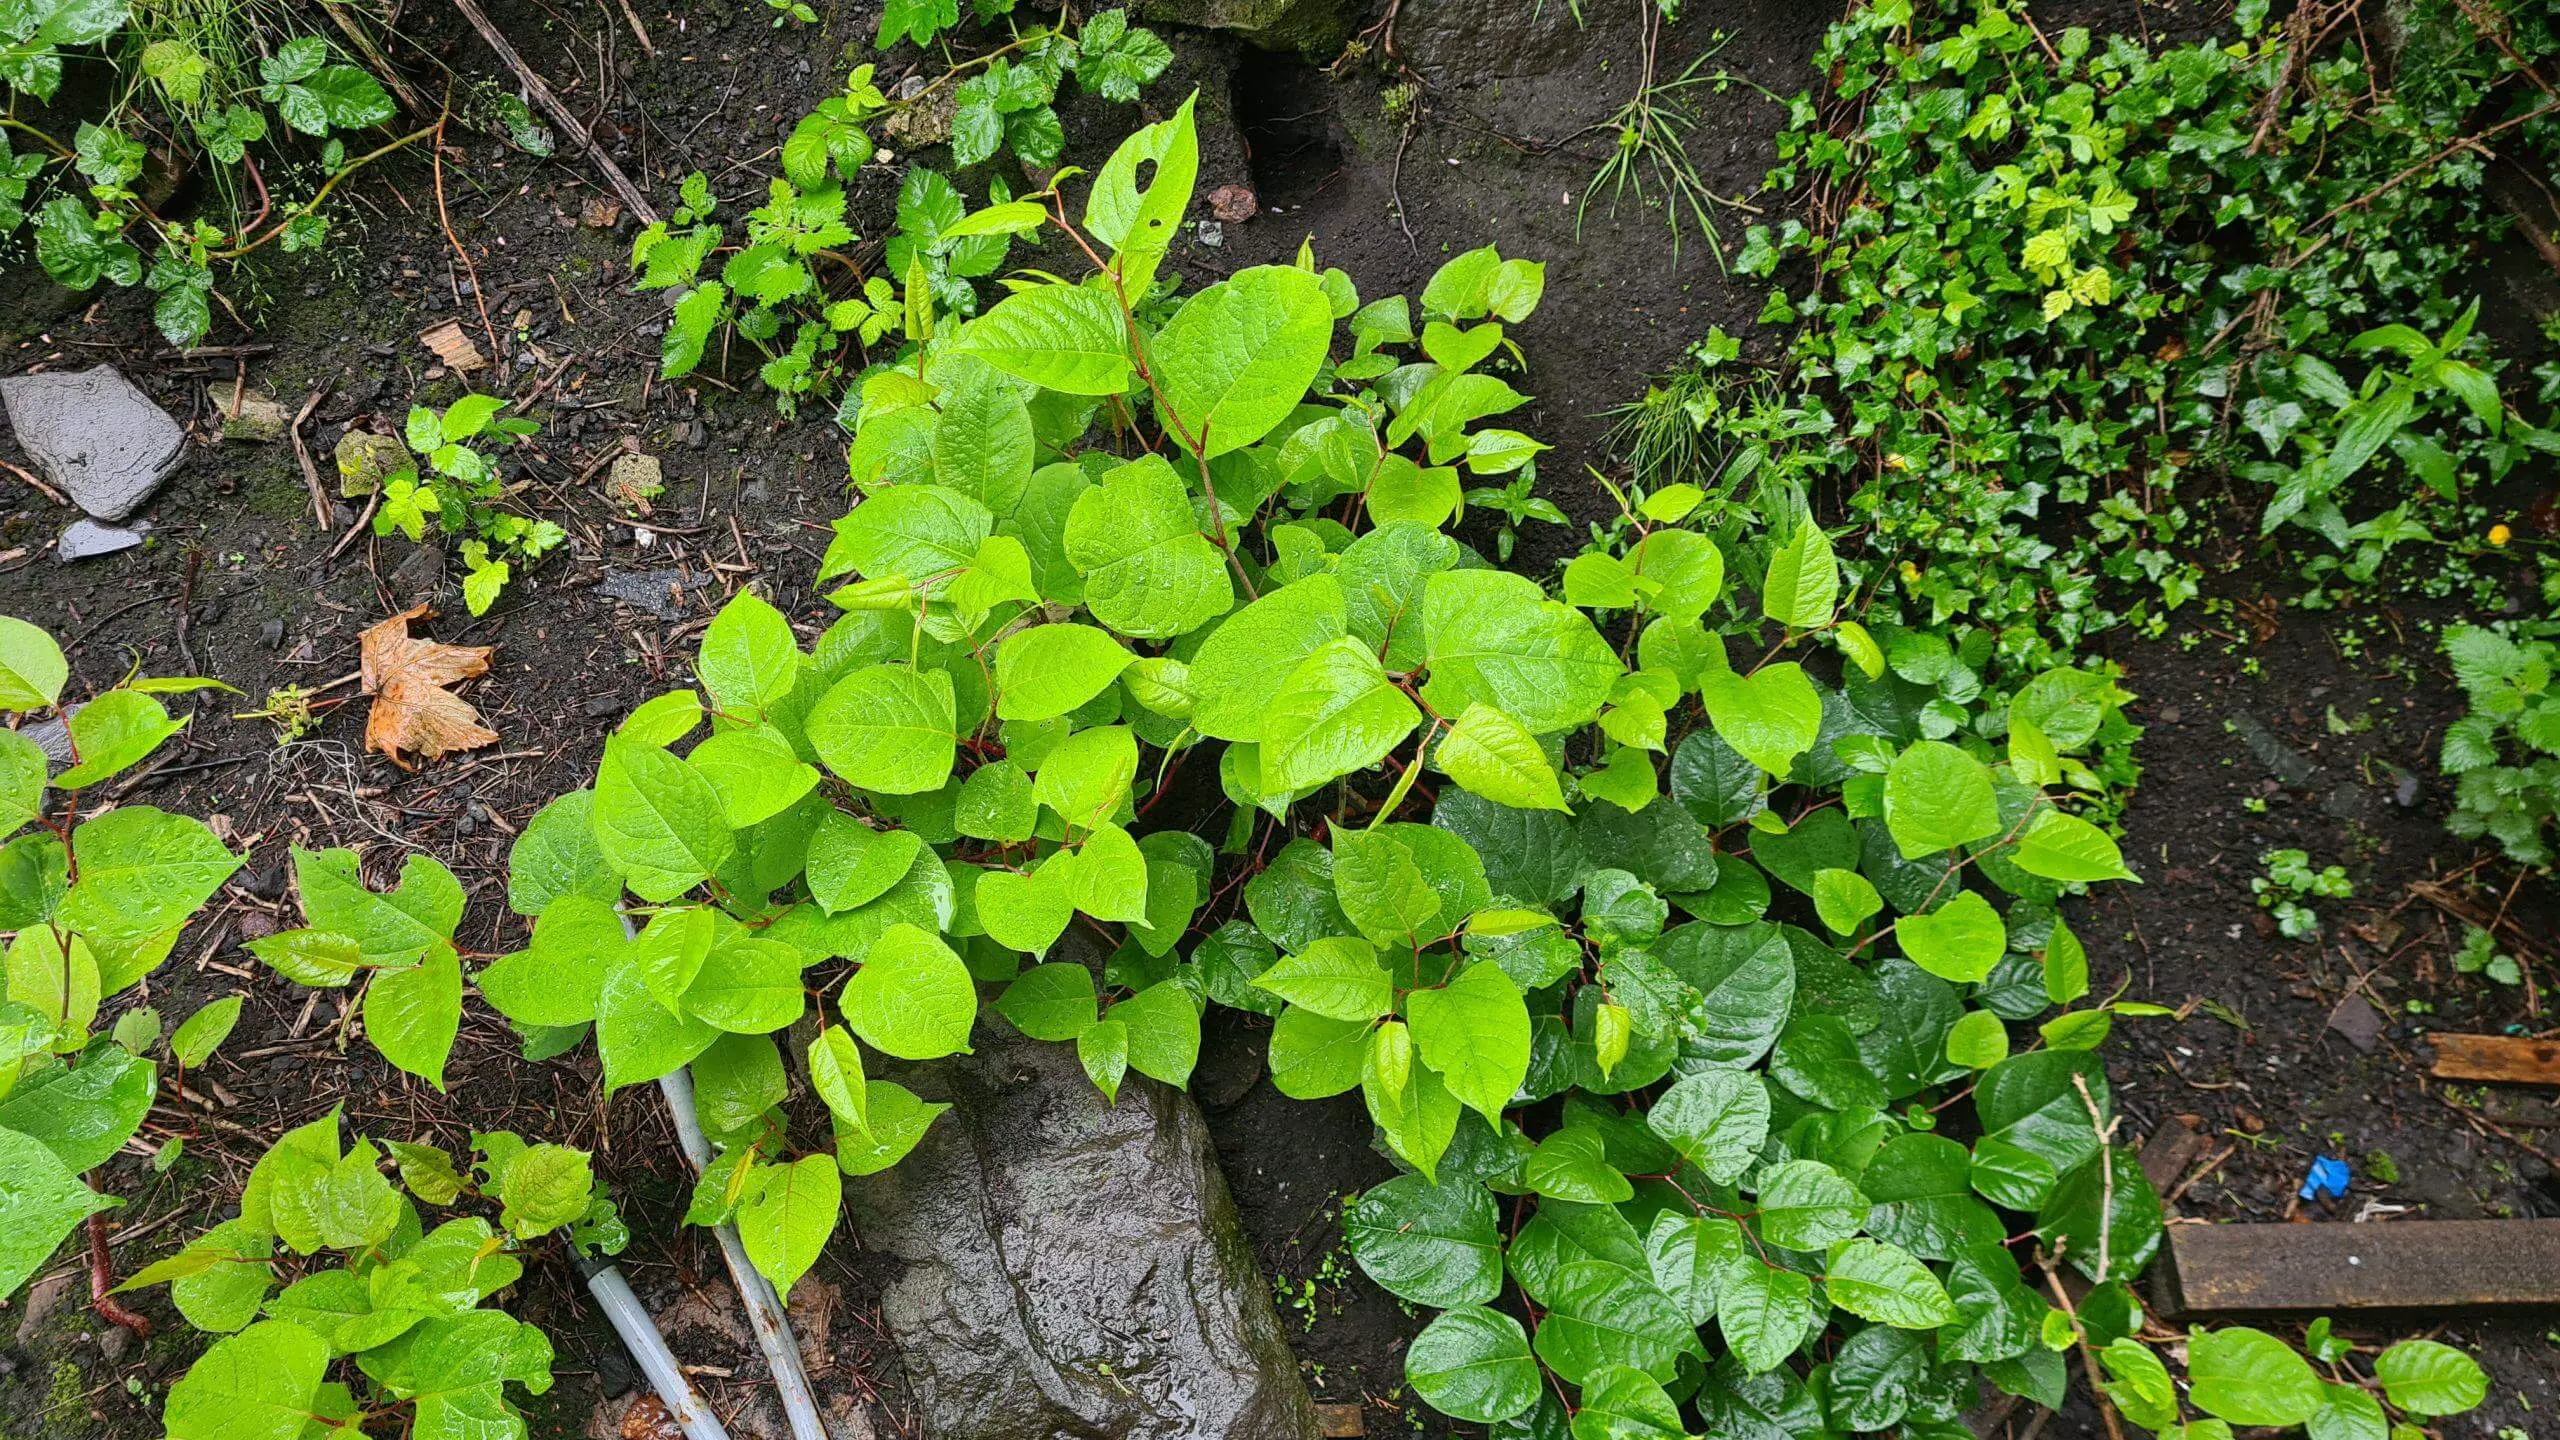 Japanese Knotweed Facts